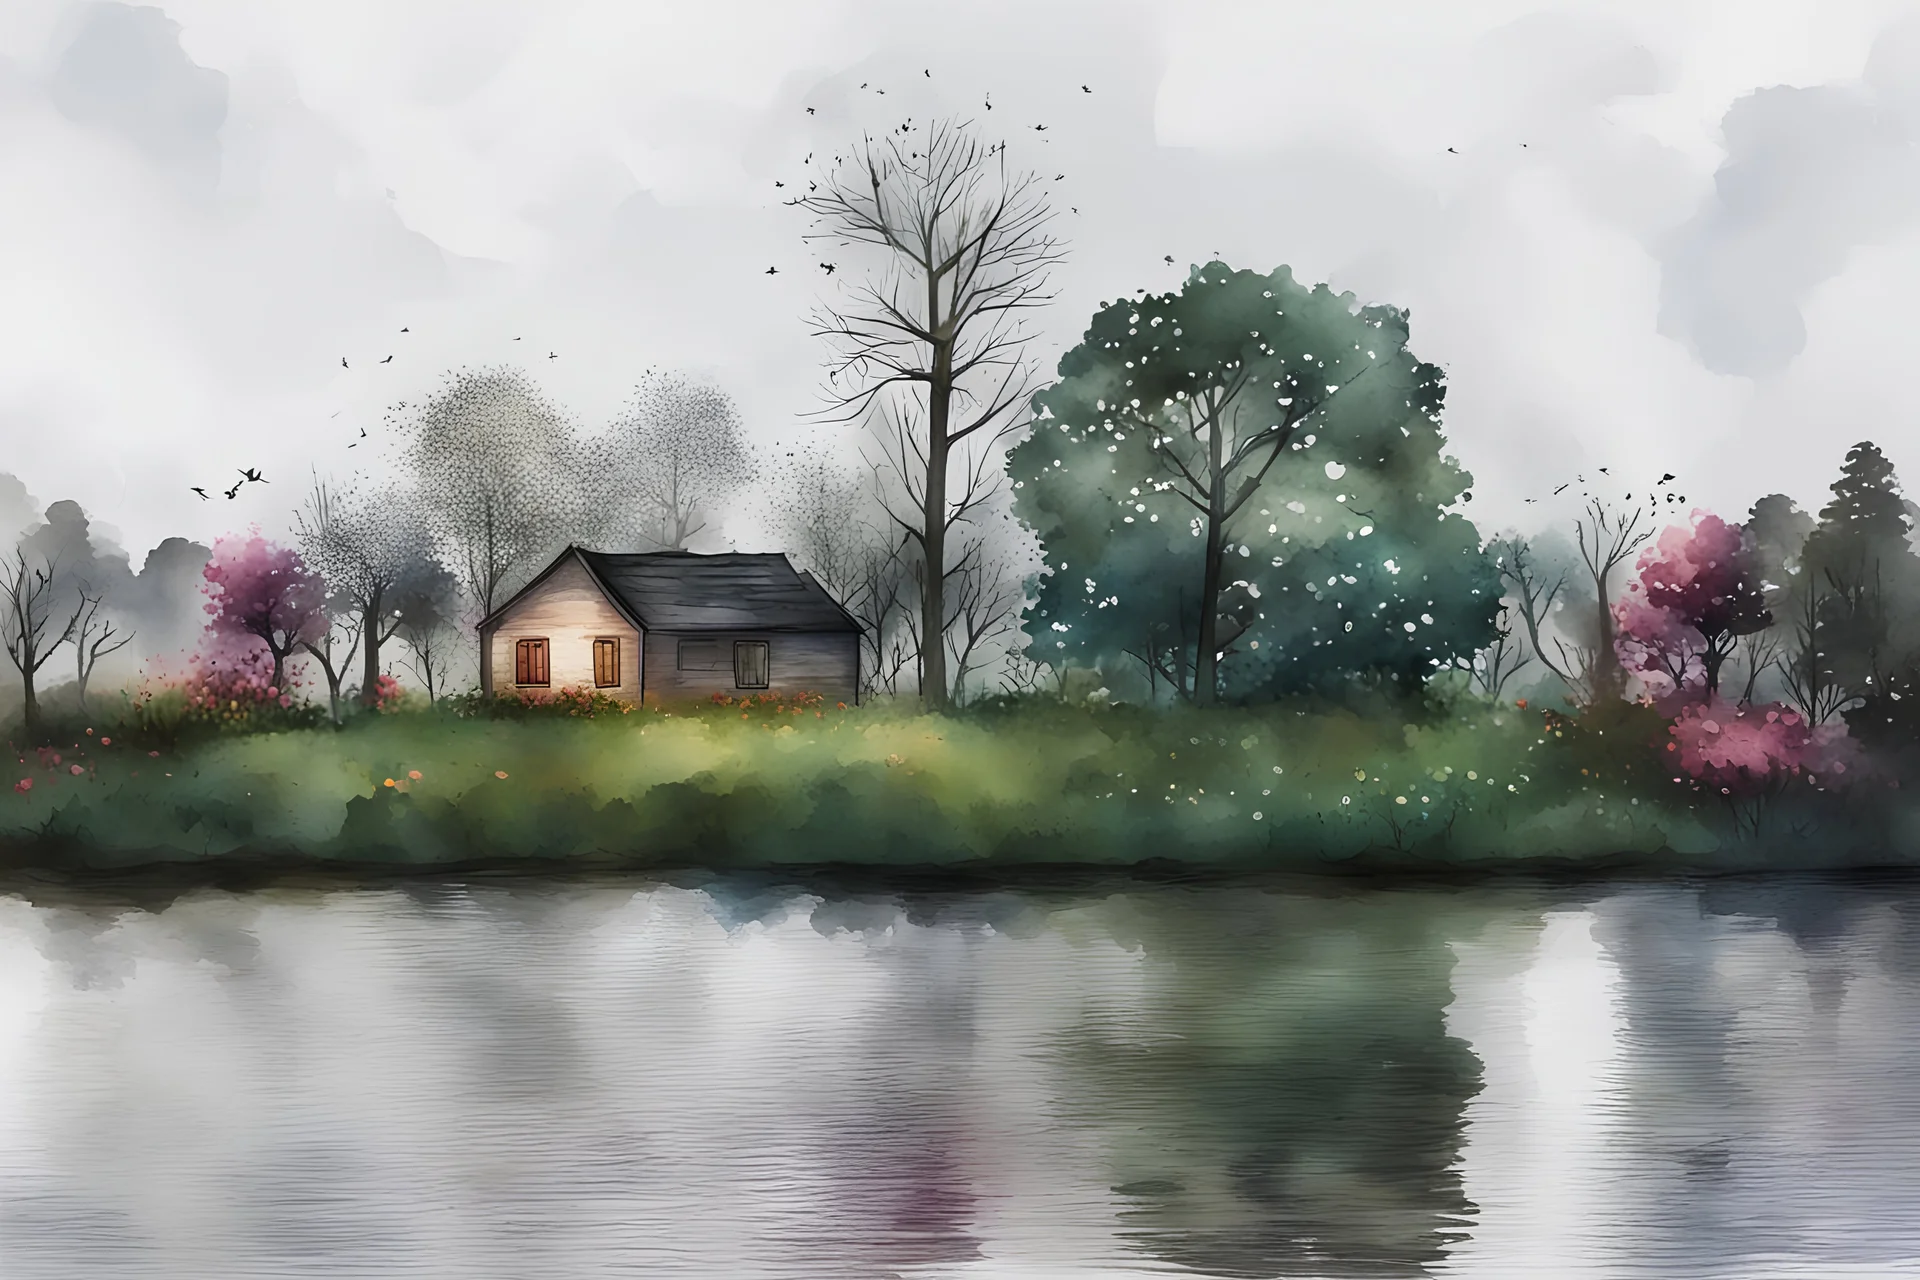 Create a illustration in a watercolor style from the image with a calm but cheerful mood with a house less trees in background and add some colorful flowers